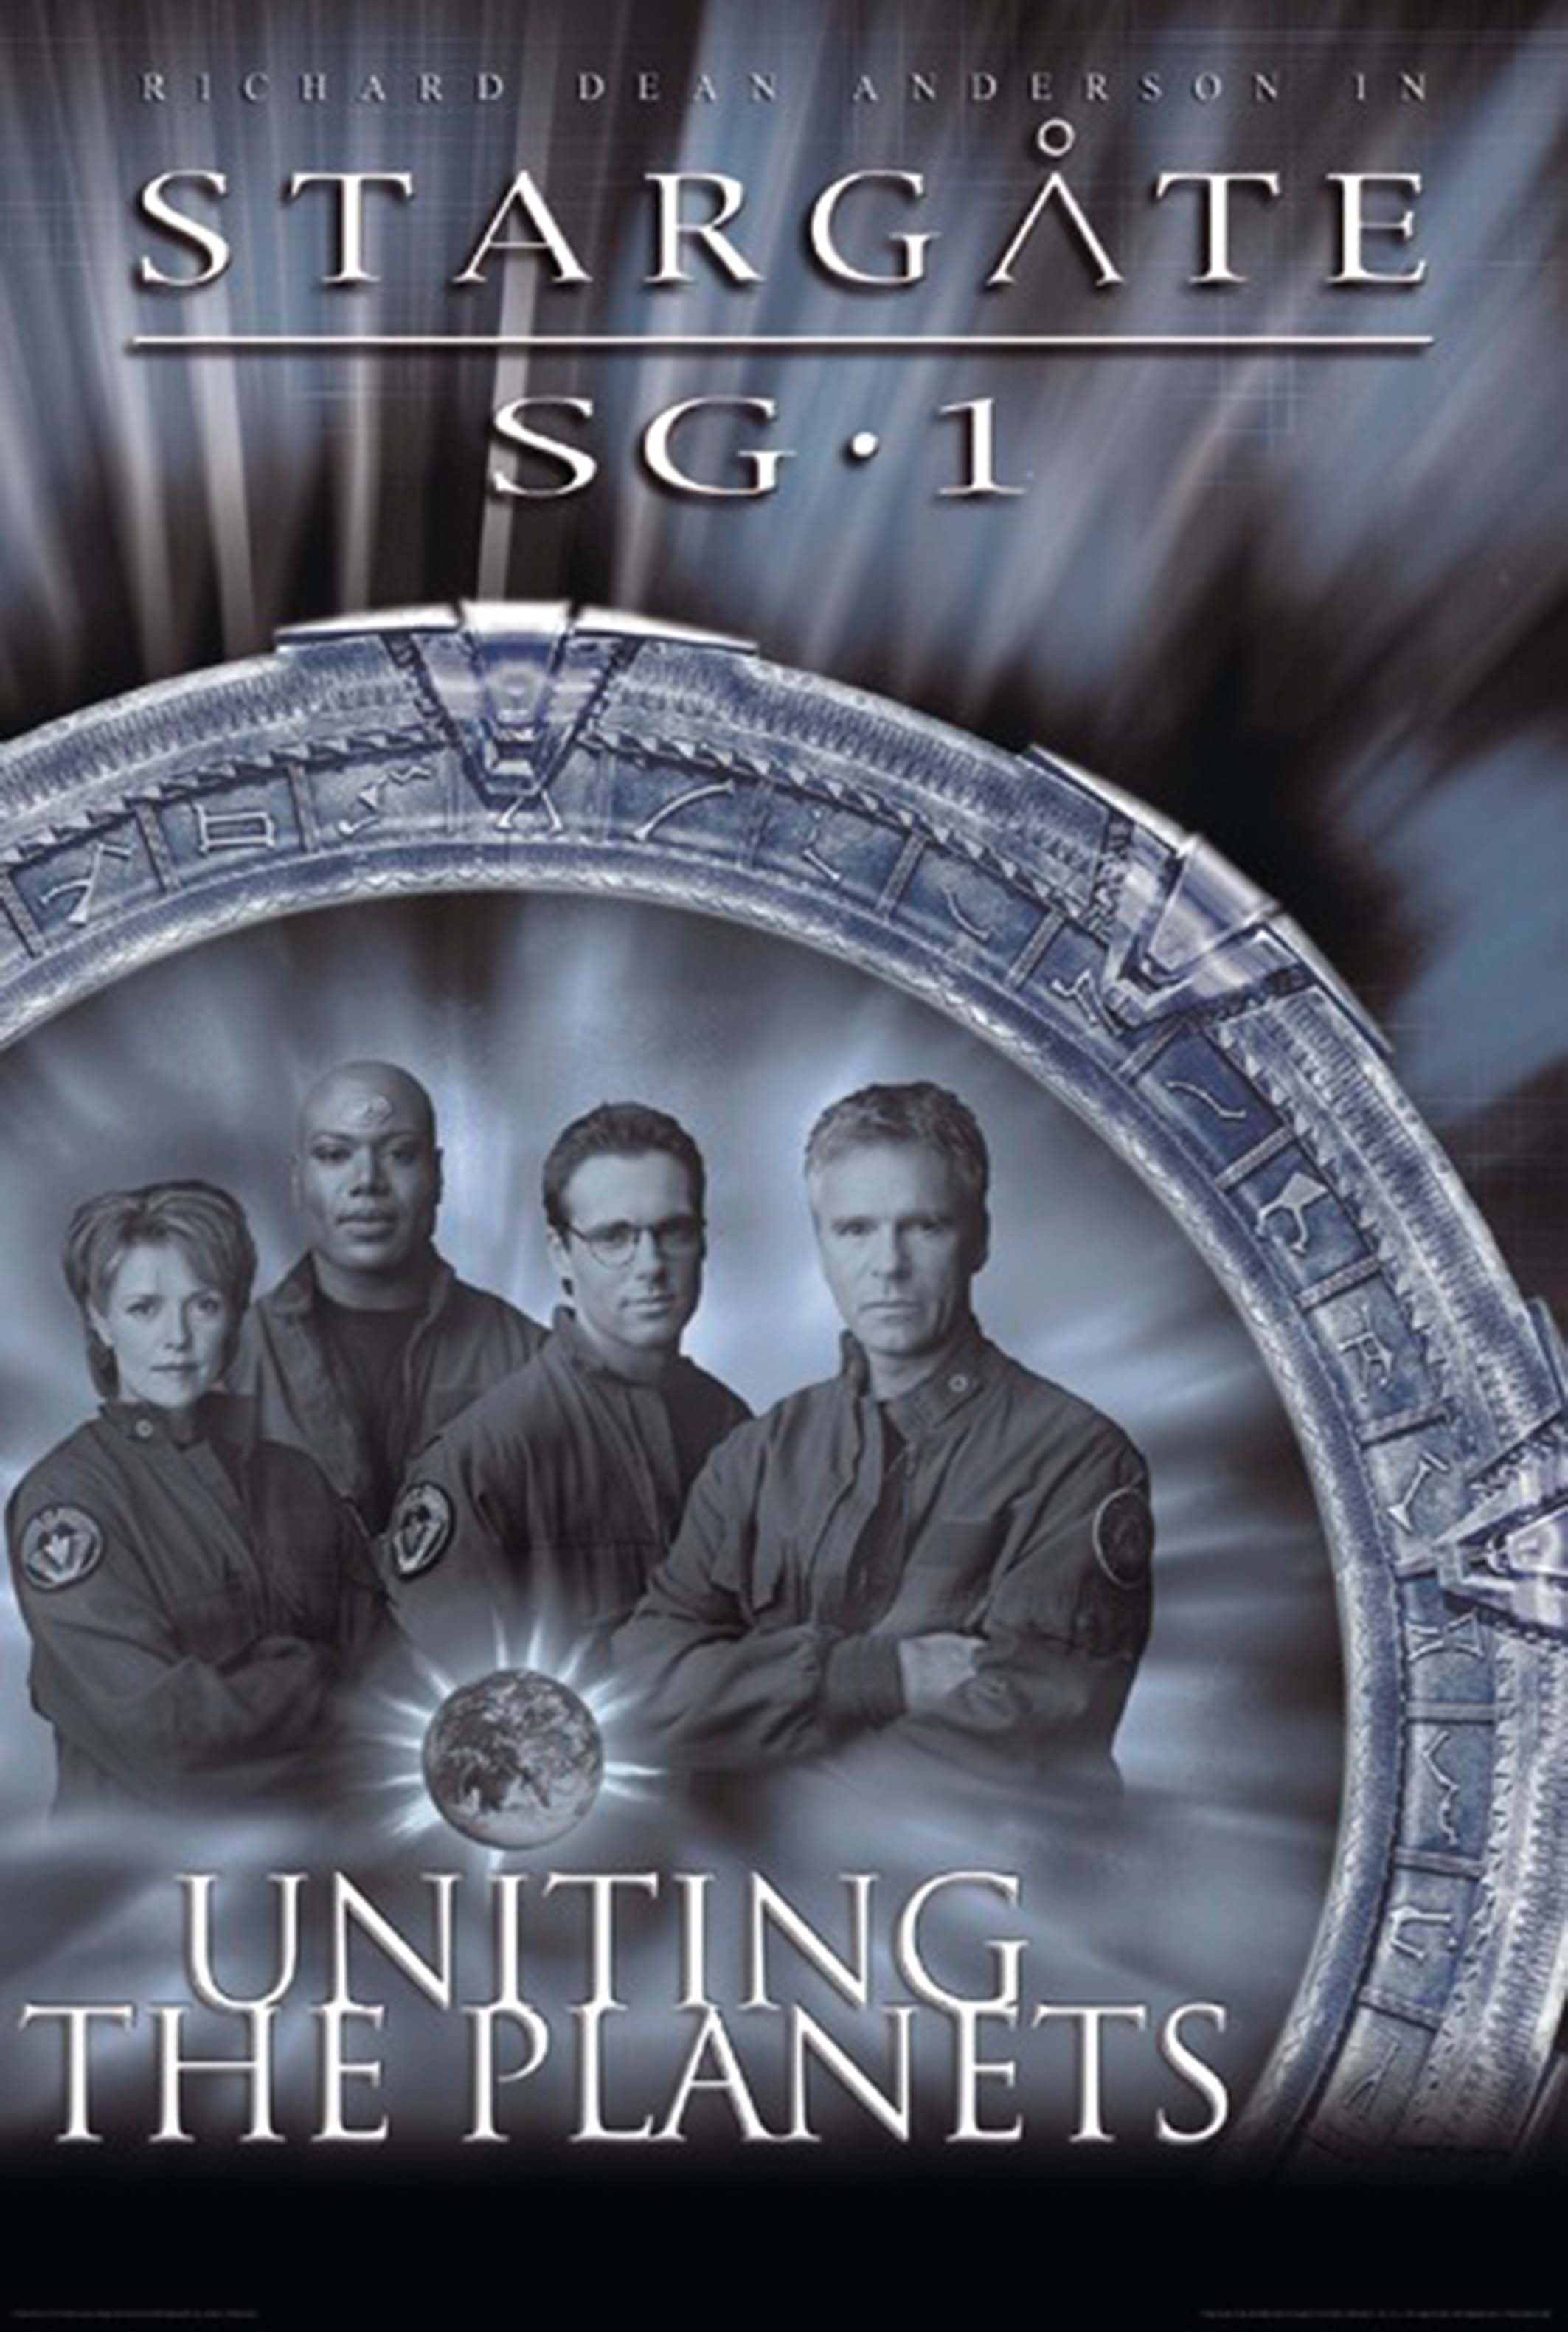 Close Up Poster Stargate Poster Stargate Sg1 Uniting the Planets (Crew) 68,5